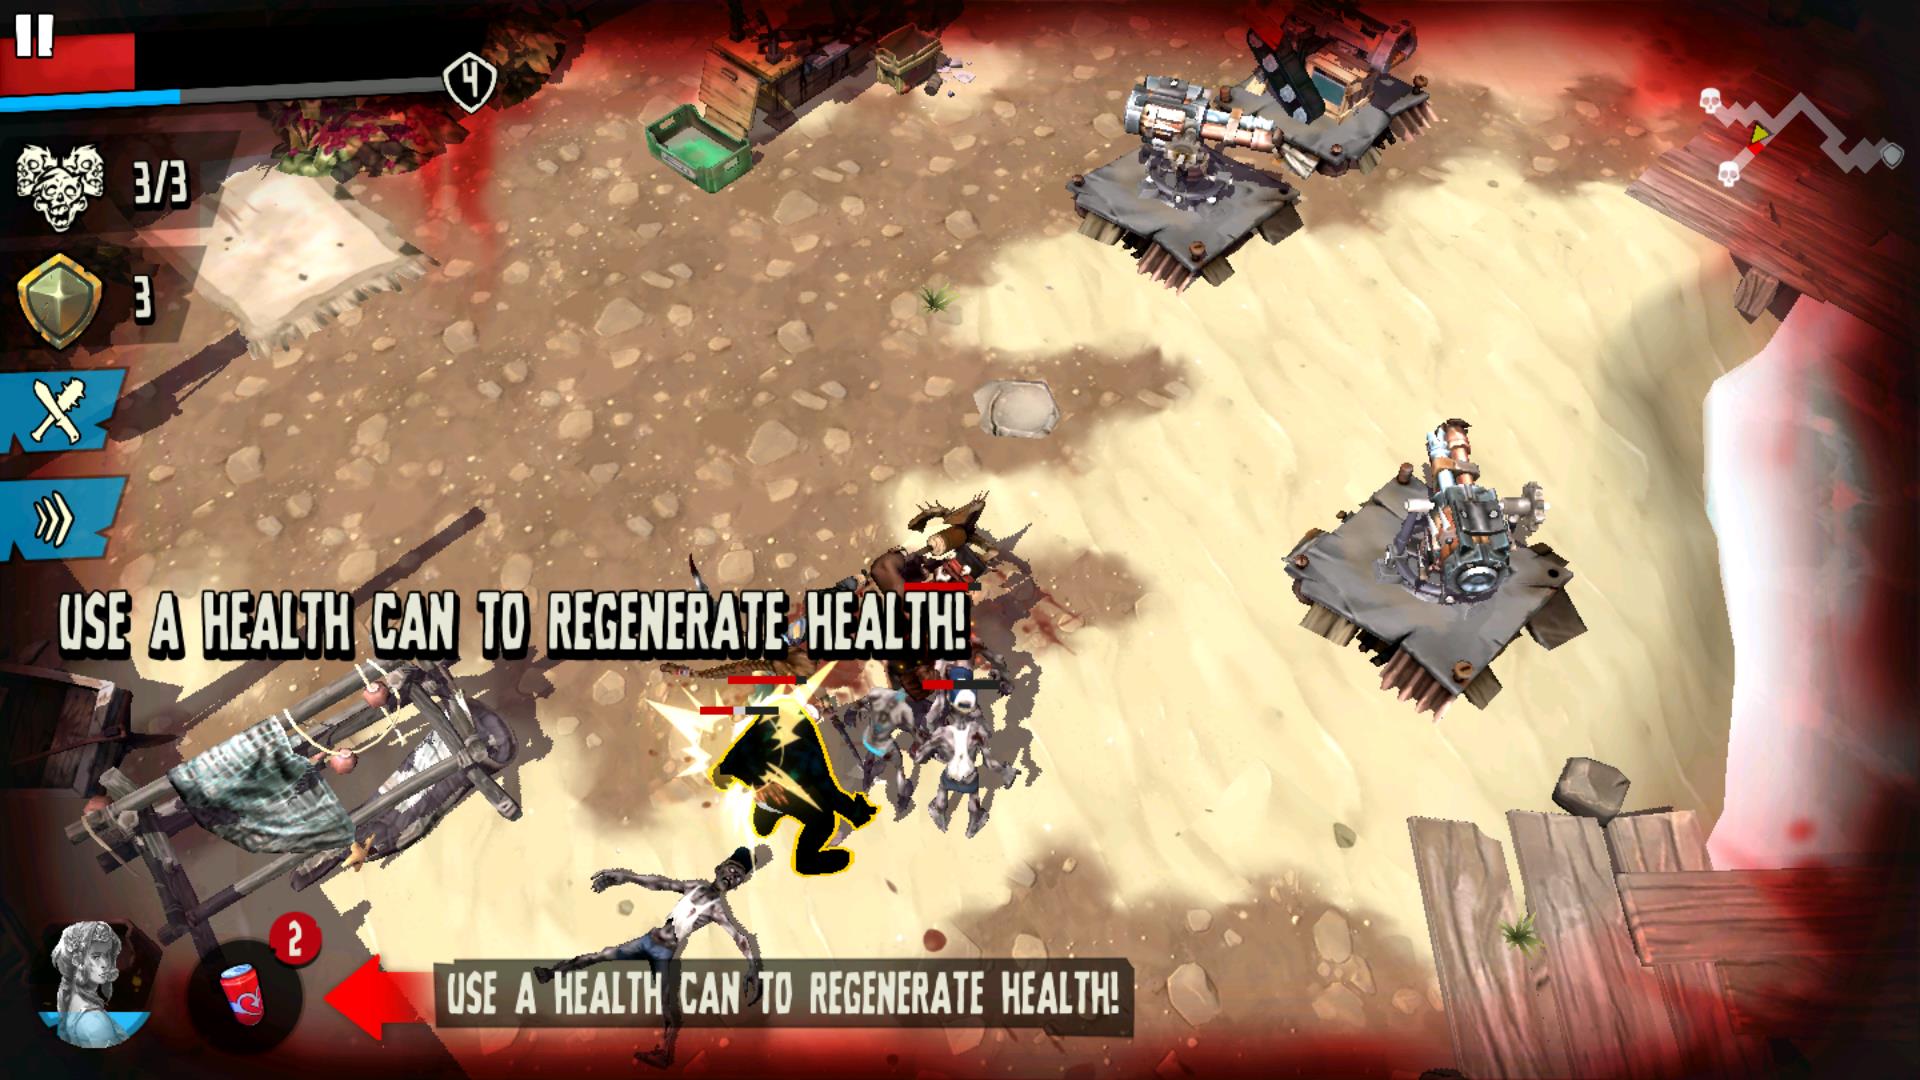 Dead Island: SurVivors is a mobile game with Dead Island branding